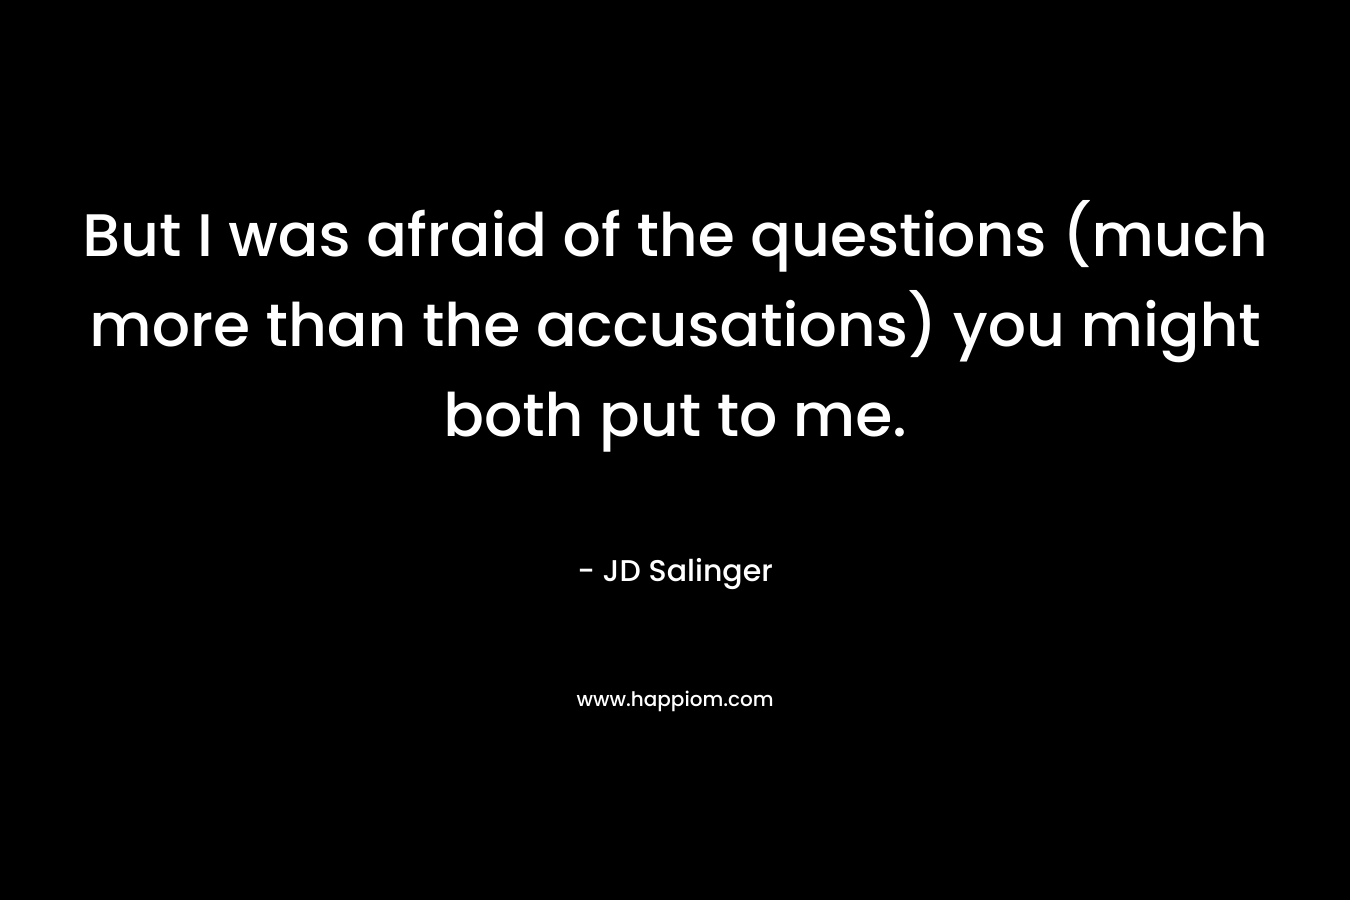 But I was afraid of the questions (much more than the accusations) you might both put to me. 